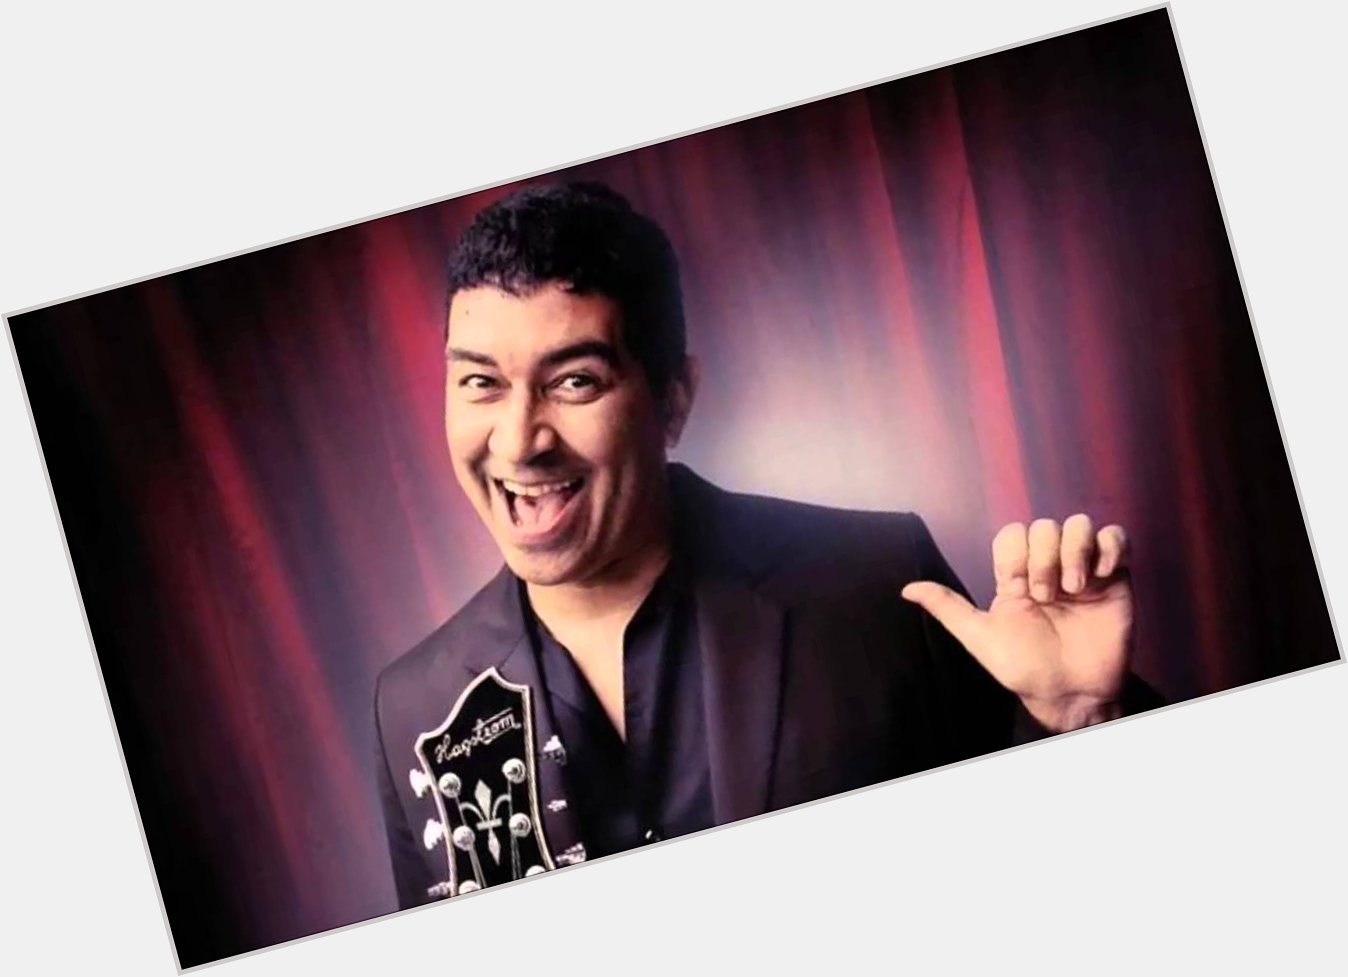 HAPPY BIRTHDAY PAT SMEAR!  Hope your day is the best ever! 